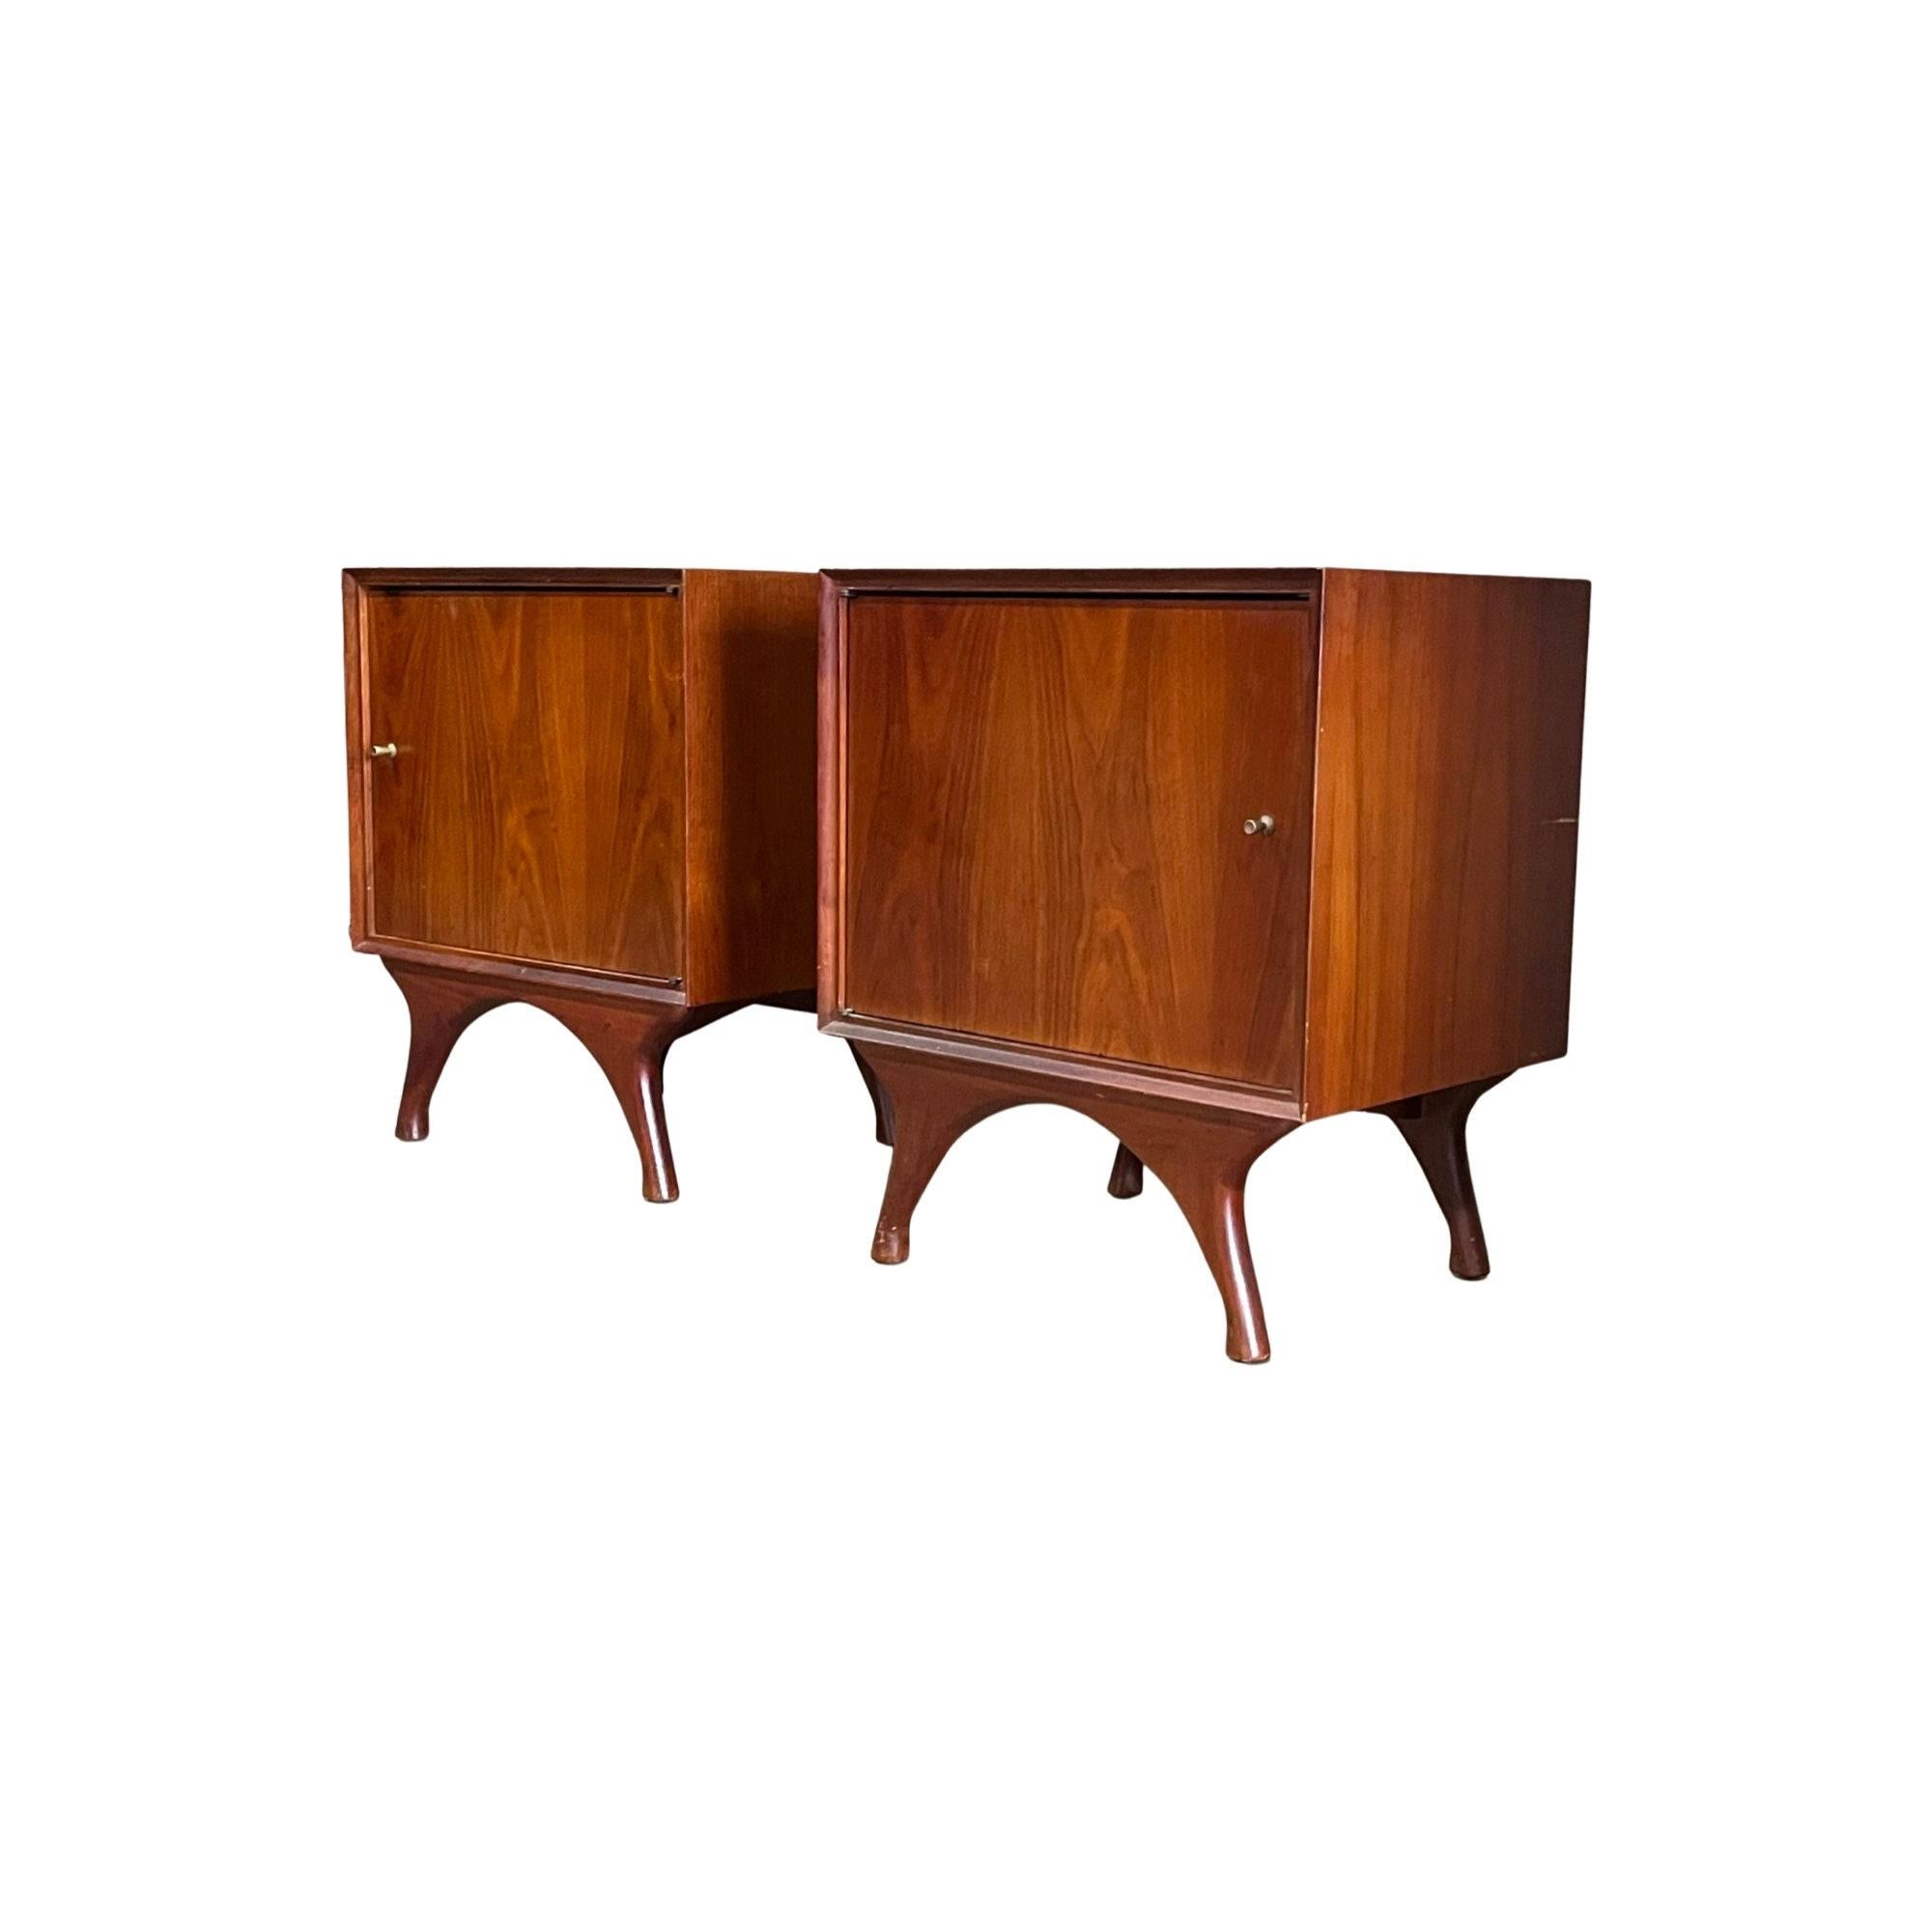 Step into the allure of the 1960s with our Vintage Mid Century Modern Pair of Nightstands, exuding timeless charm. Crafted to meticulous standards, these nightstands offer a spacious interior shelf discreetly tucked behind a minimalistic door. Their